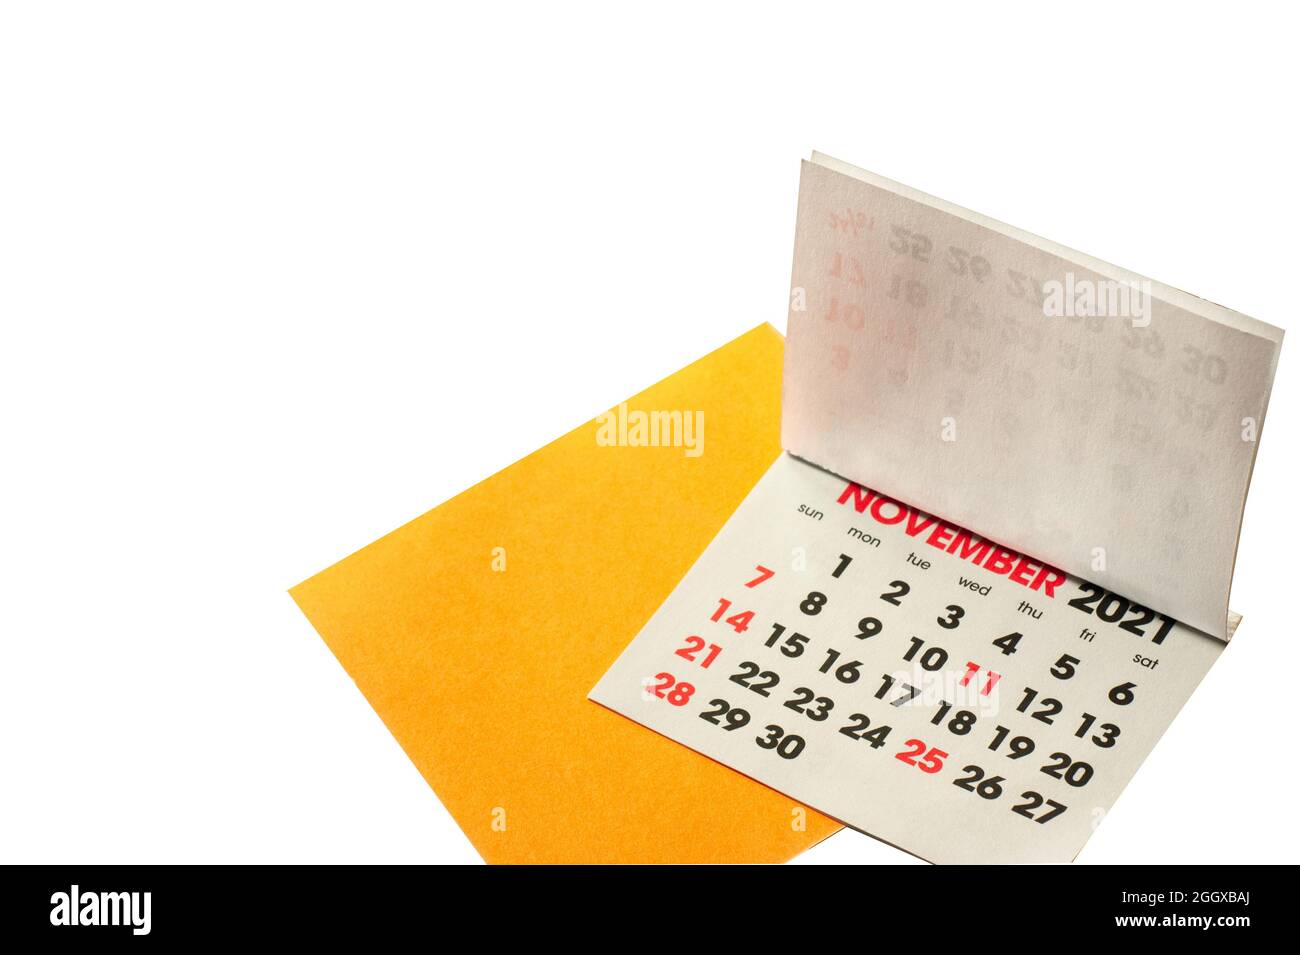 November 2021 calendar with yellow reminder notepaper isolated. The pages of calendar are turned ahead to emphasize November in red. Stock Photo